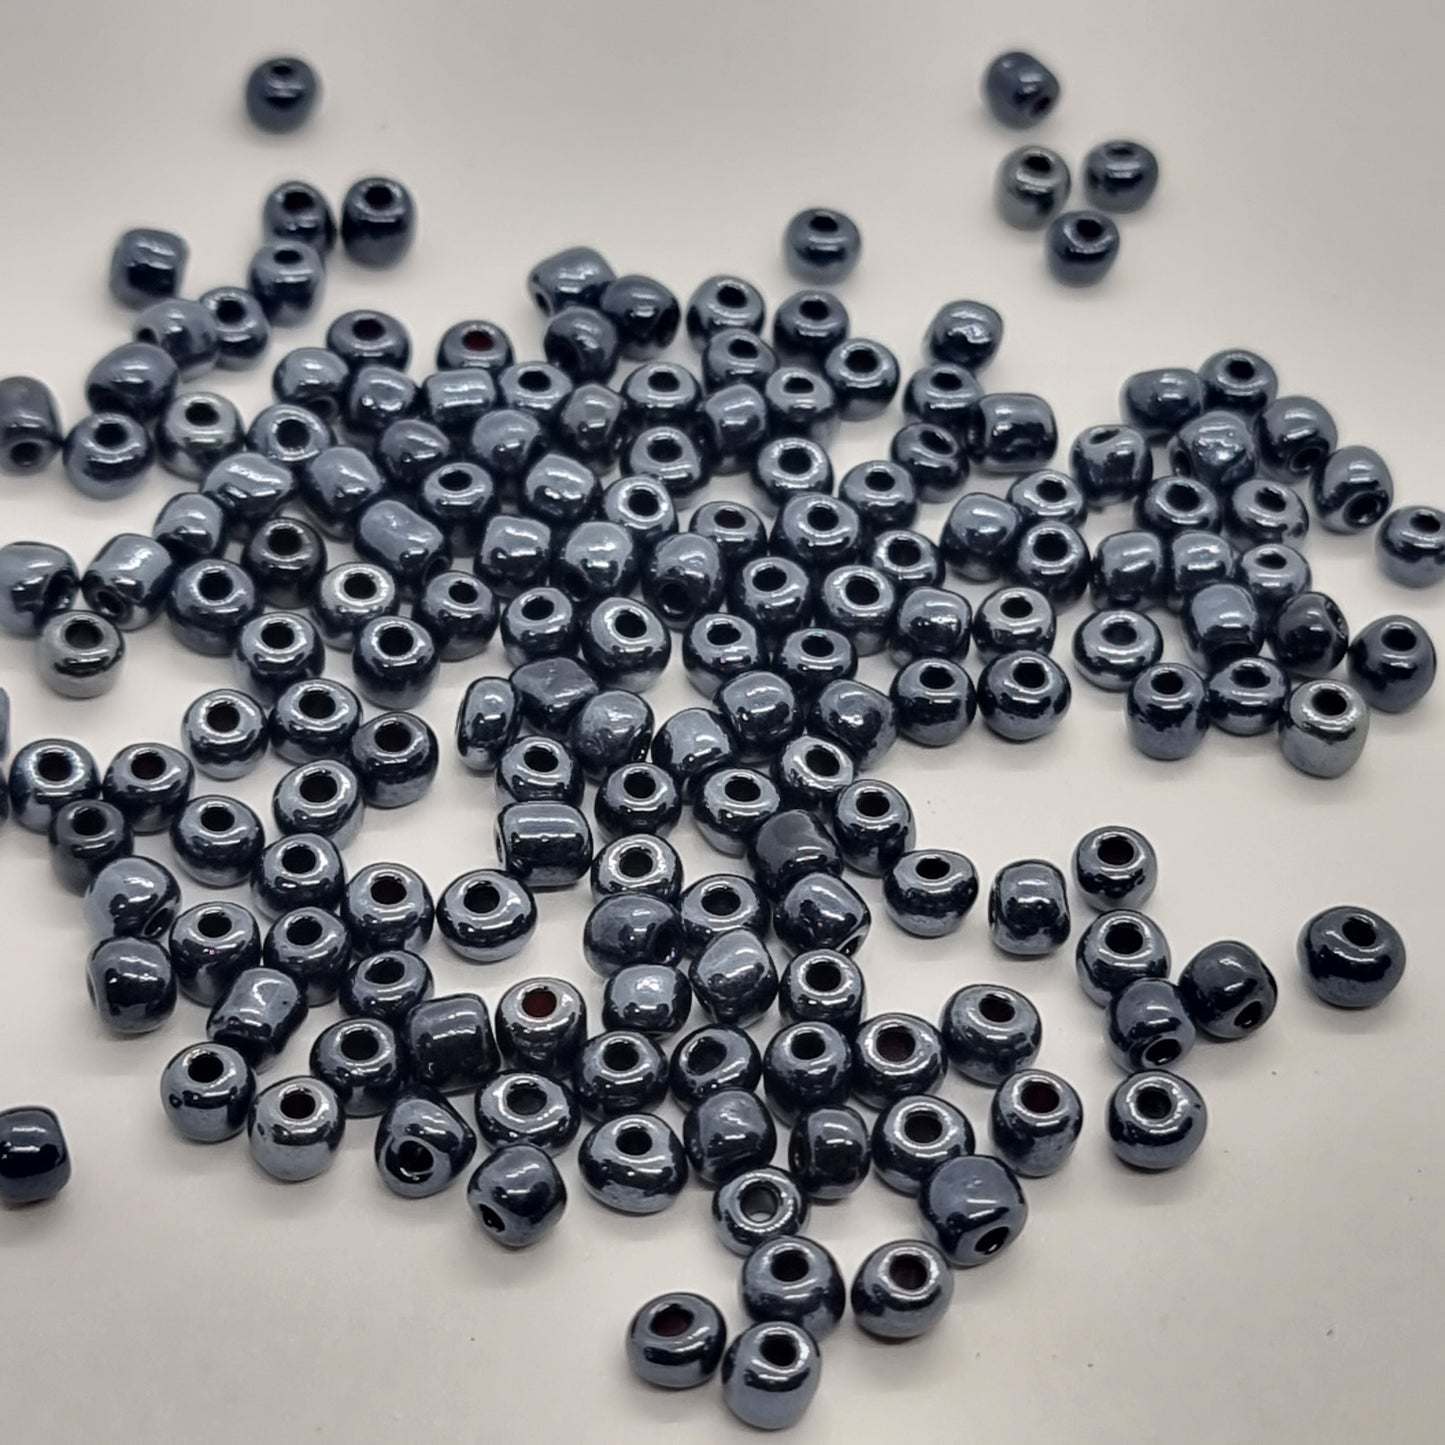 15g 4mm Black Luster Seed Beads